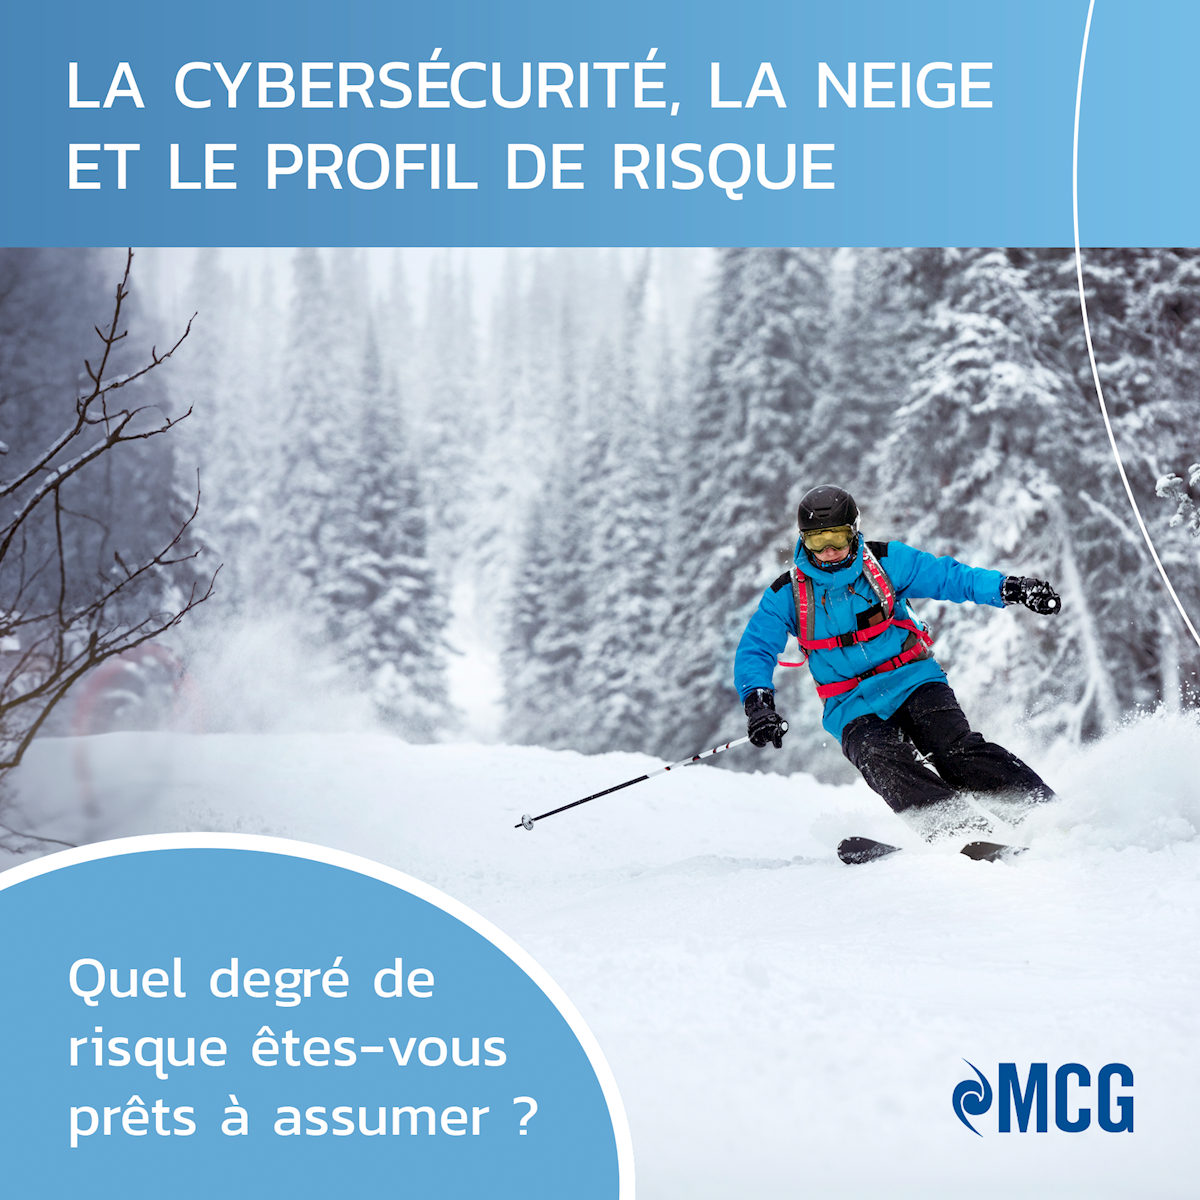 Snow, cybersecurity and the risk profile